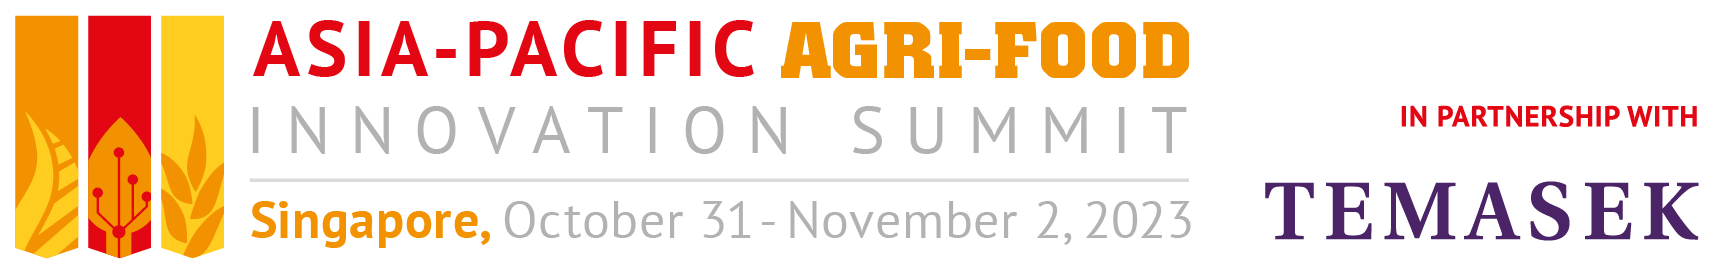 EcoPhage is a sponsor in the Asia-Pacific Agri-Food Innovation Summit in Singapore